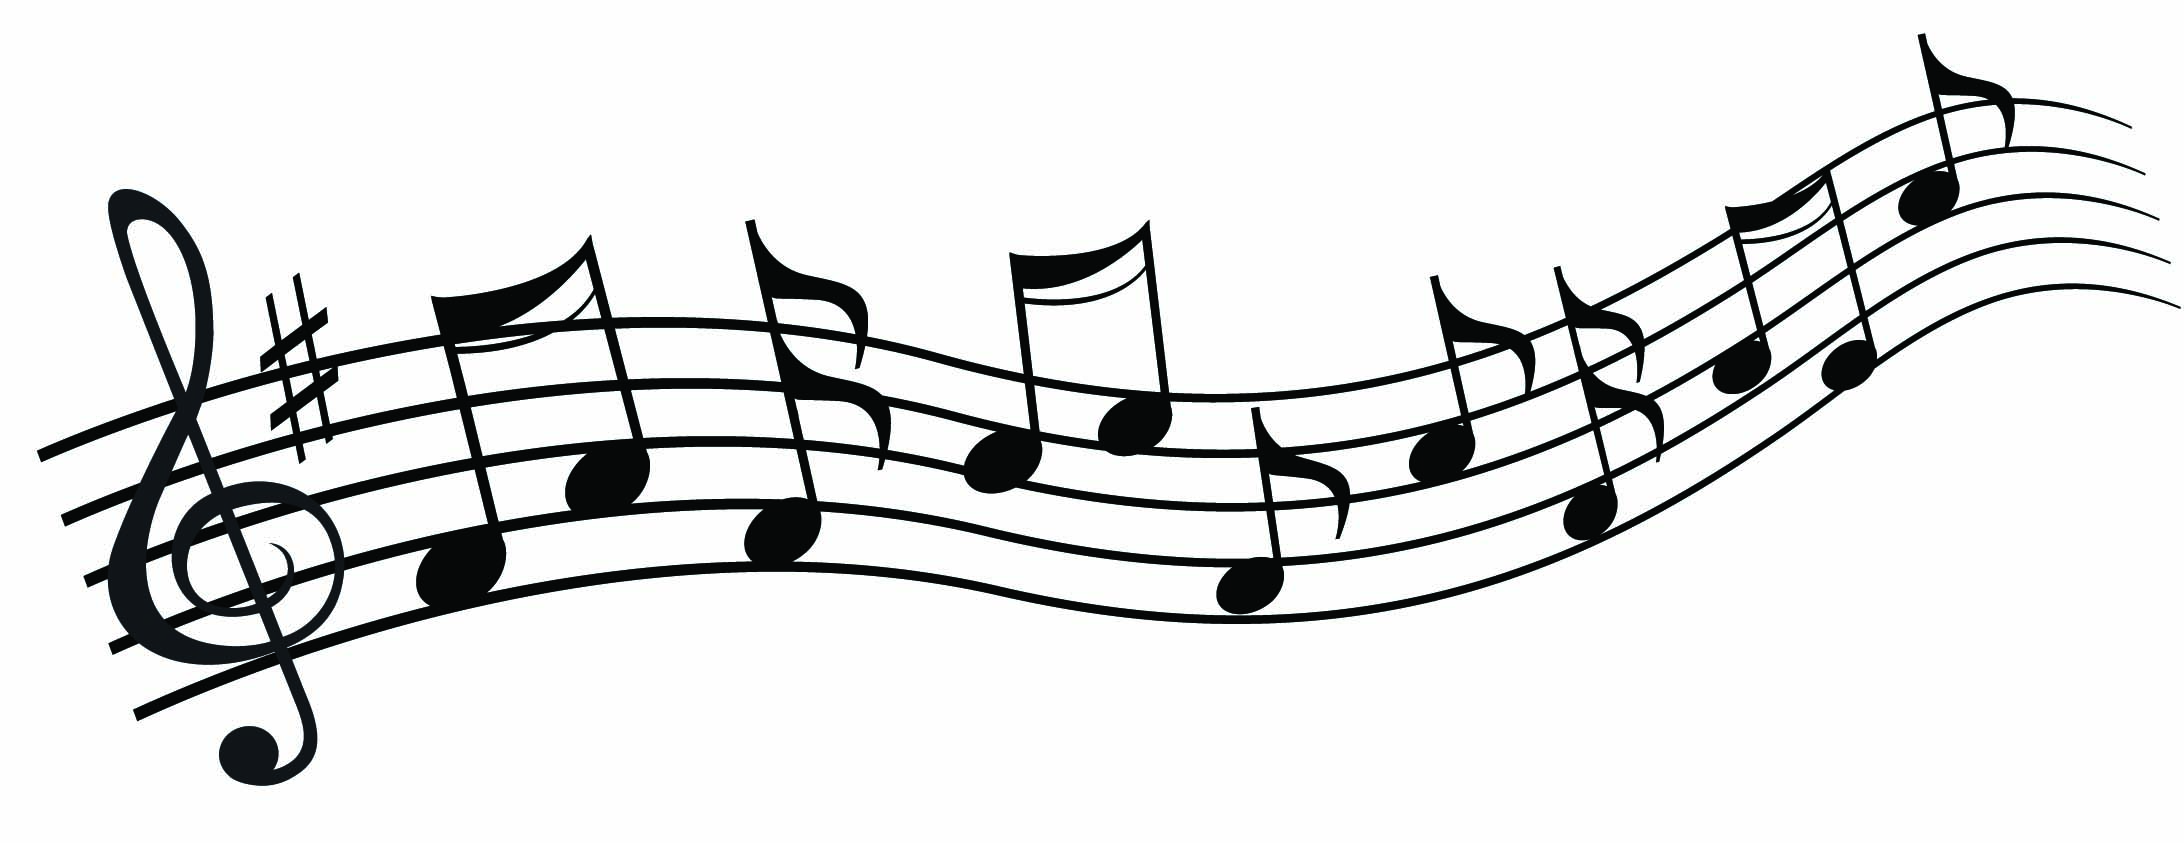 Music  black and white music notes clipart black and white cliparts